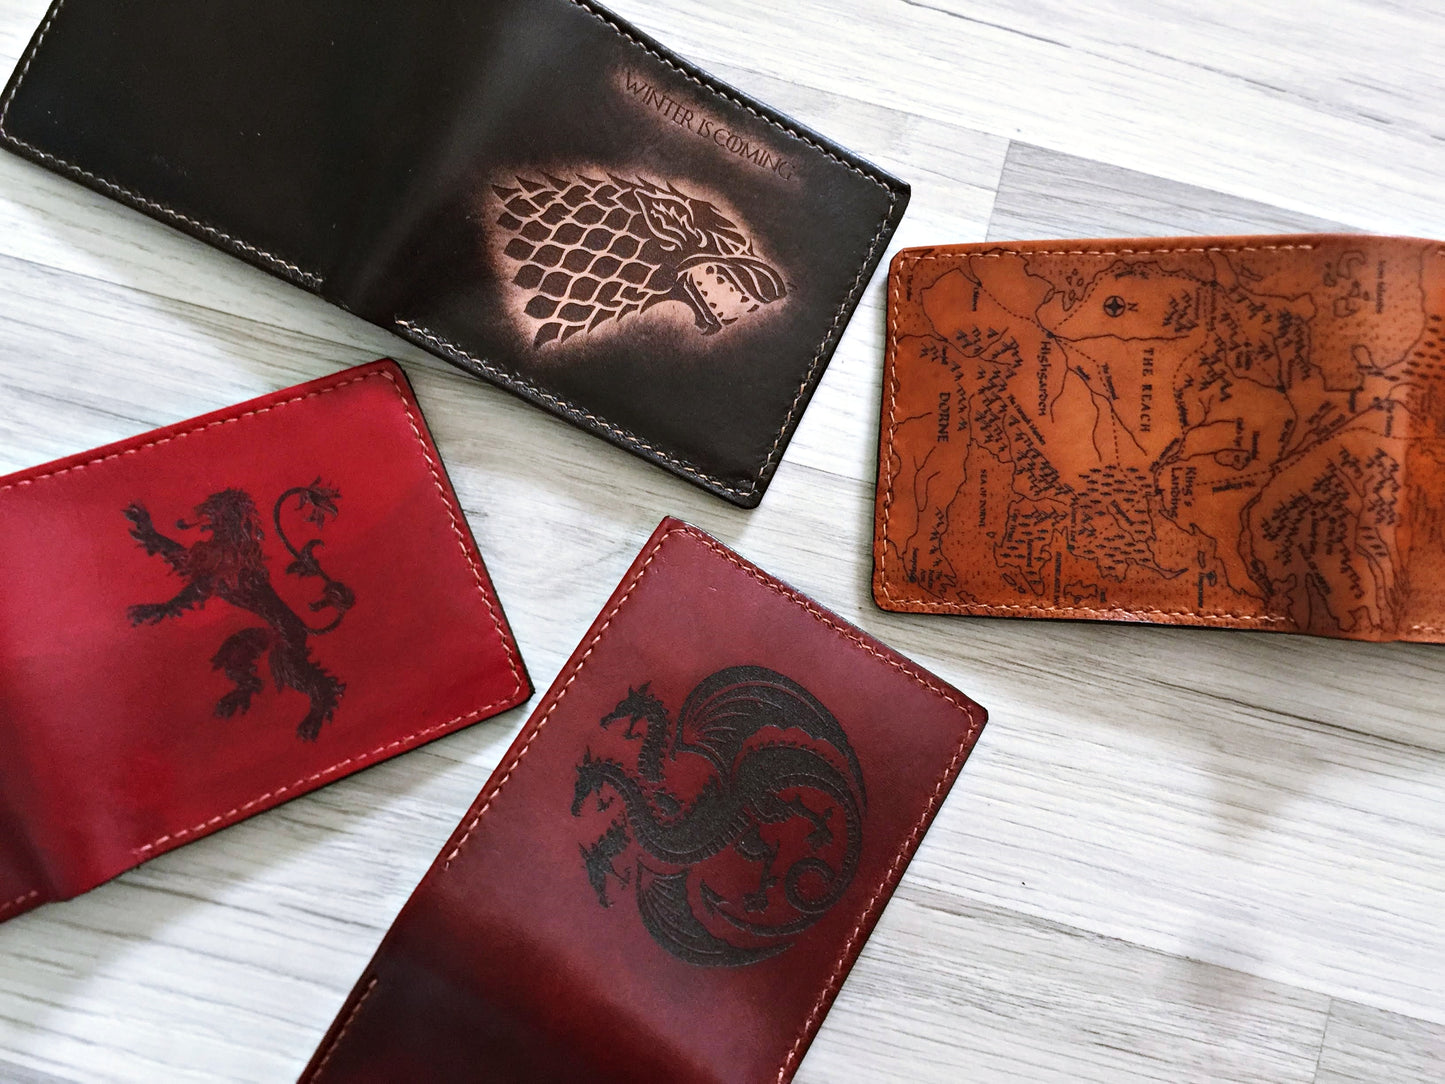 Mayan Corner - Game of Thrones Westeros Essos map men's wallet, men's gift, personalized gift for him, father boyfriend husband anniversary present